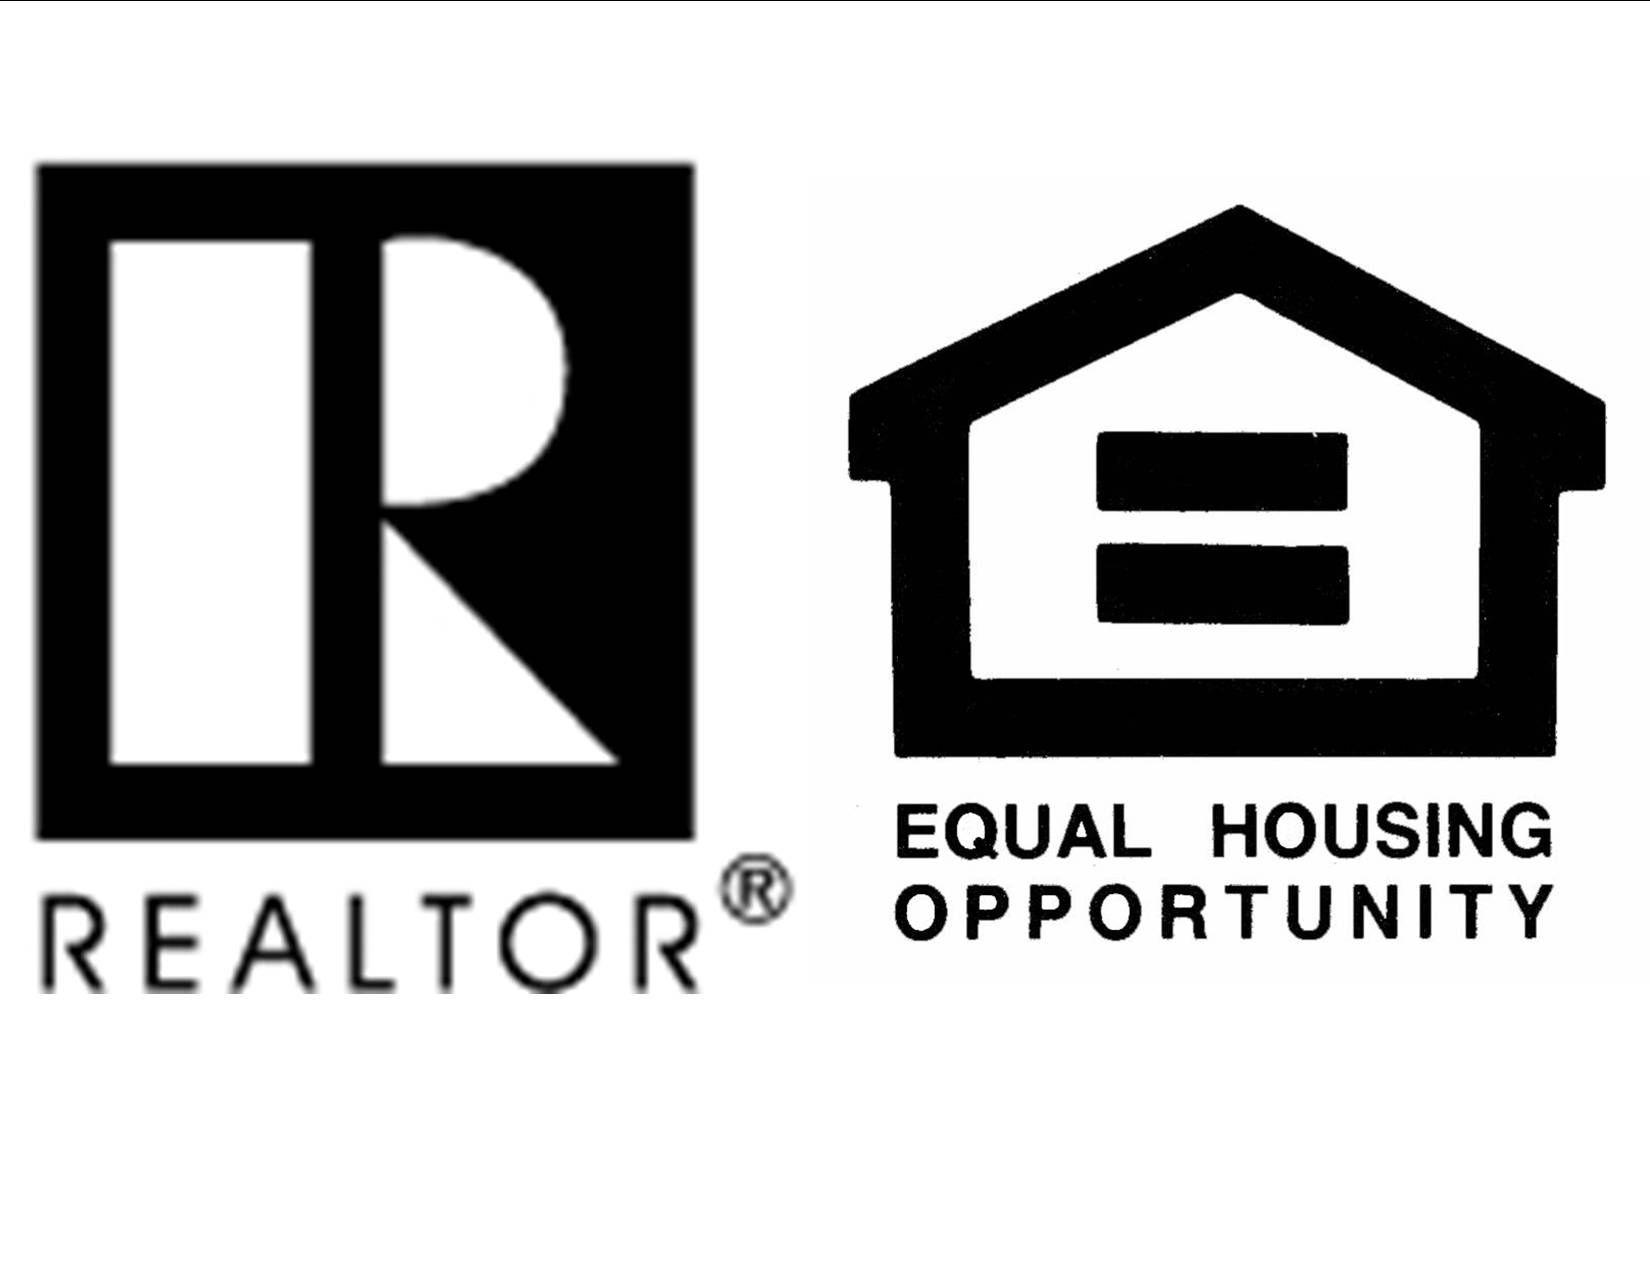 Equal Housing Opportunity Logo - Equal Opportunity Fair Housing Logo N3 free image